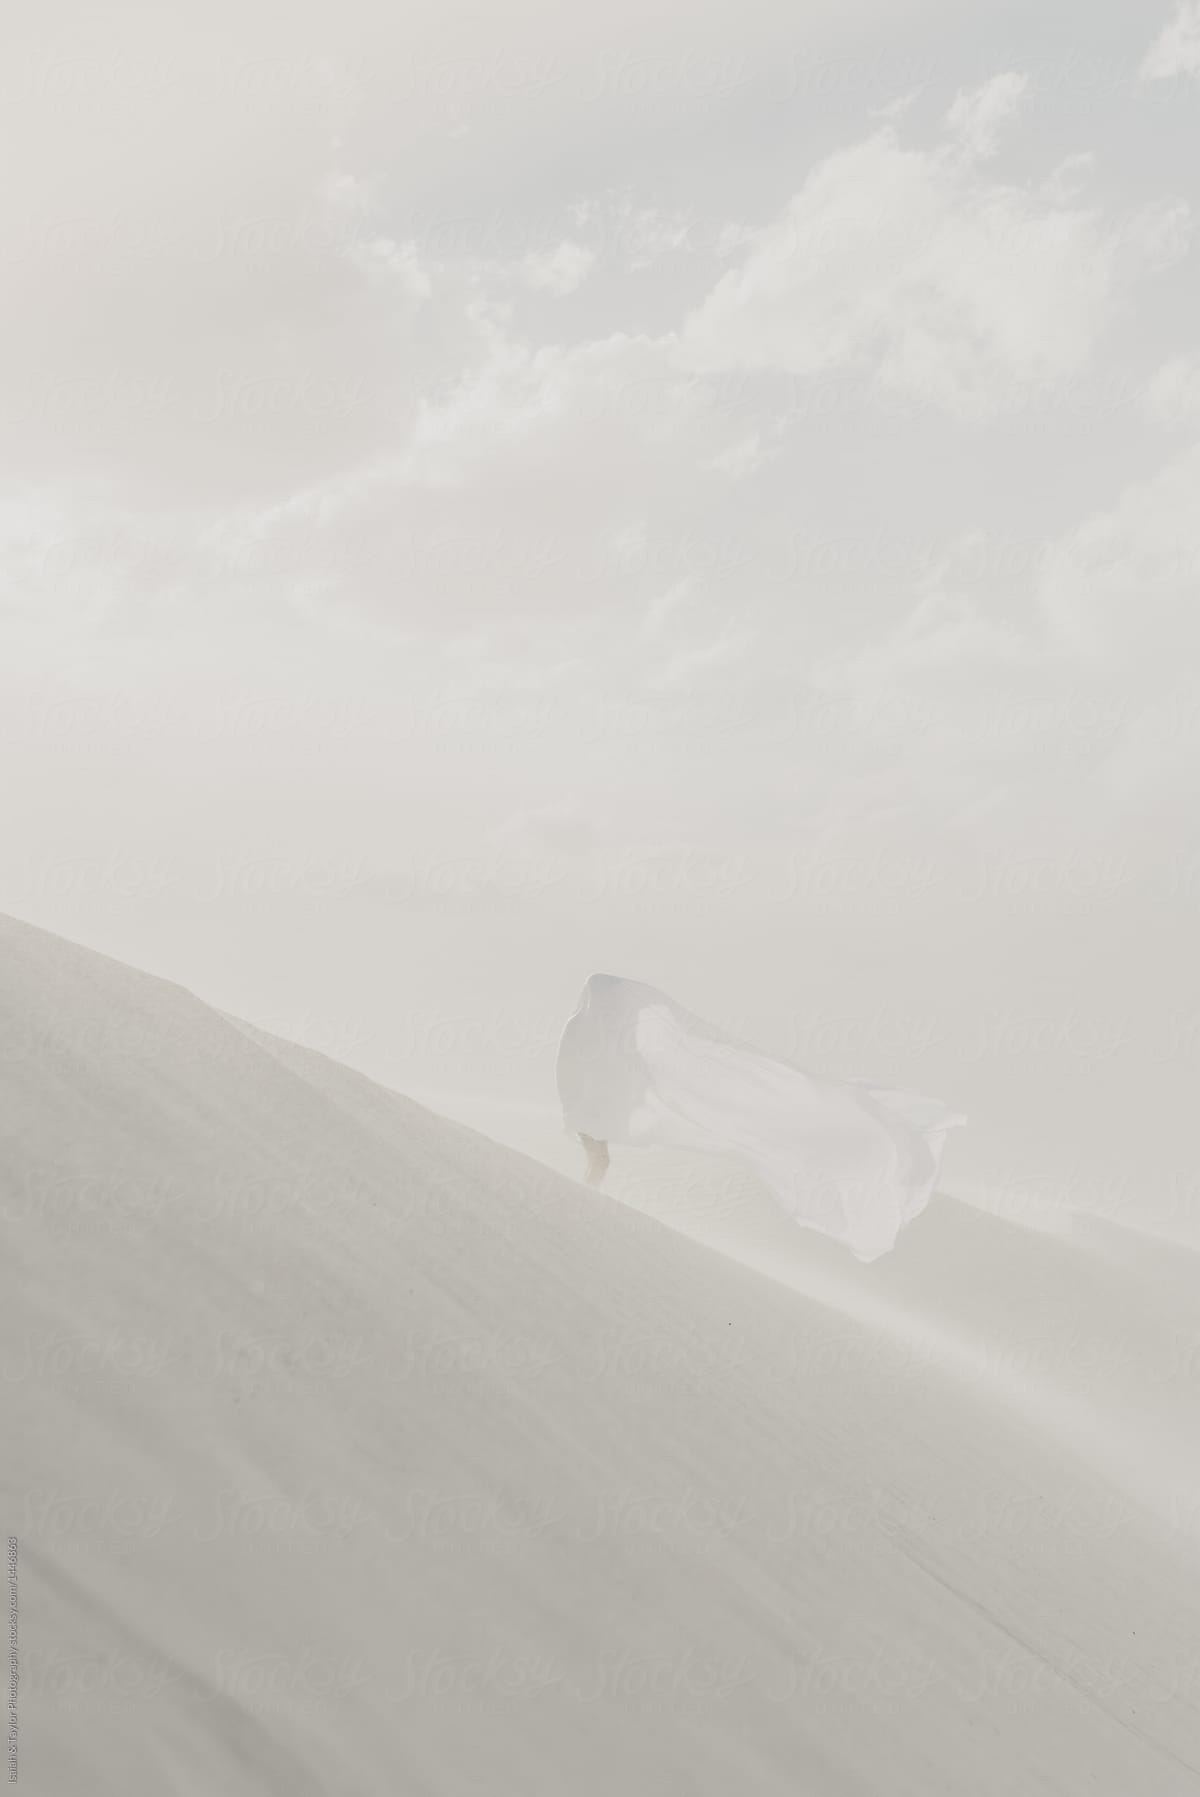 Person standing far away on sand dune with a white sheet disguising them into surrounding